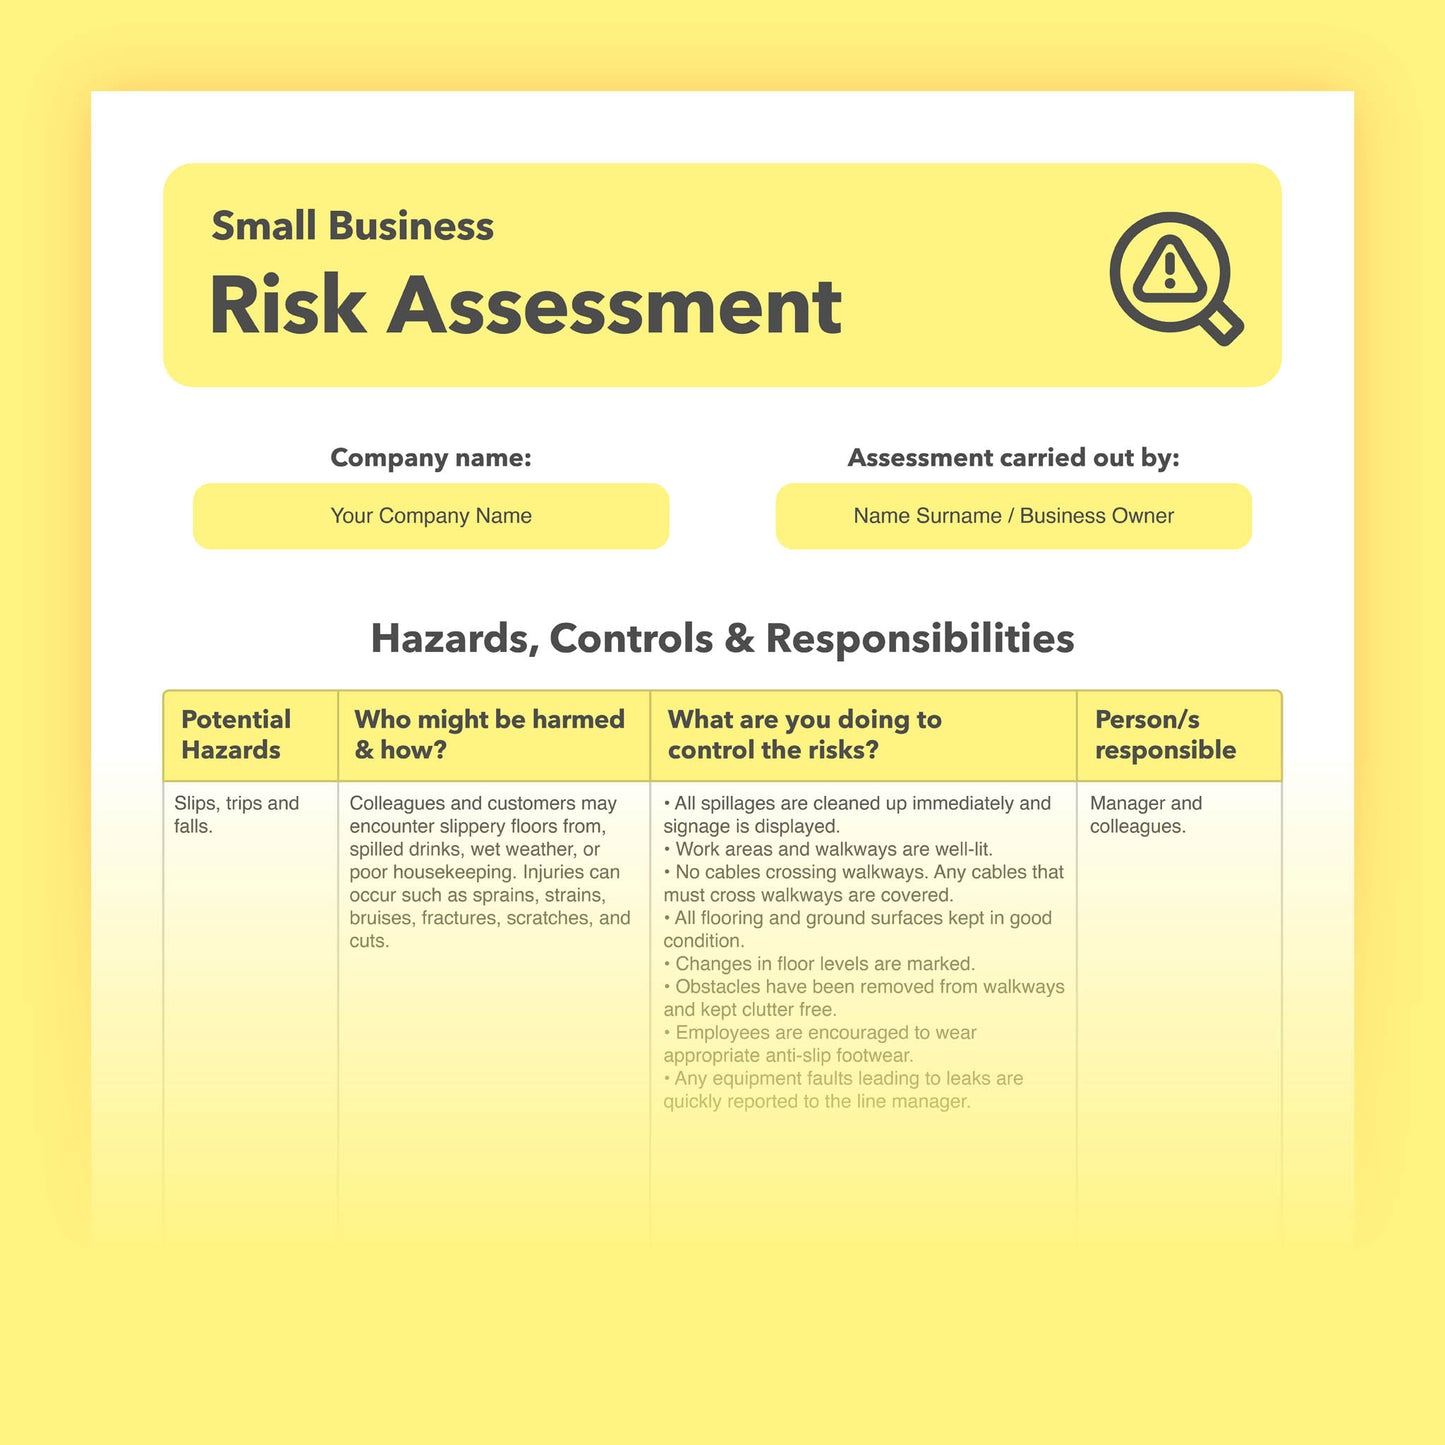 Risk assessment template for Small businesses